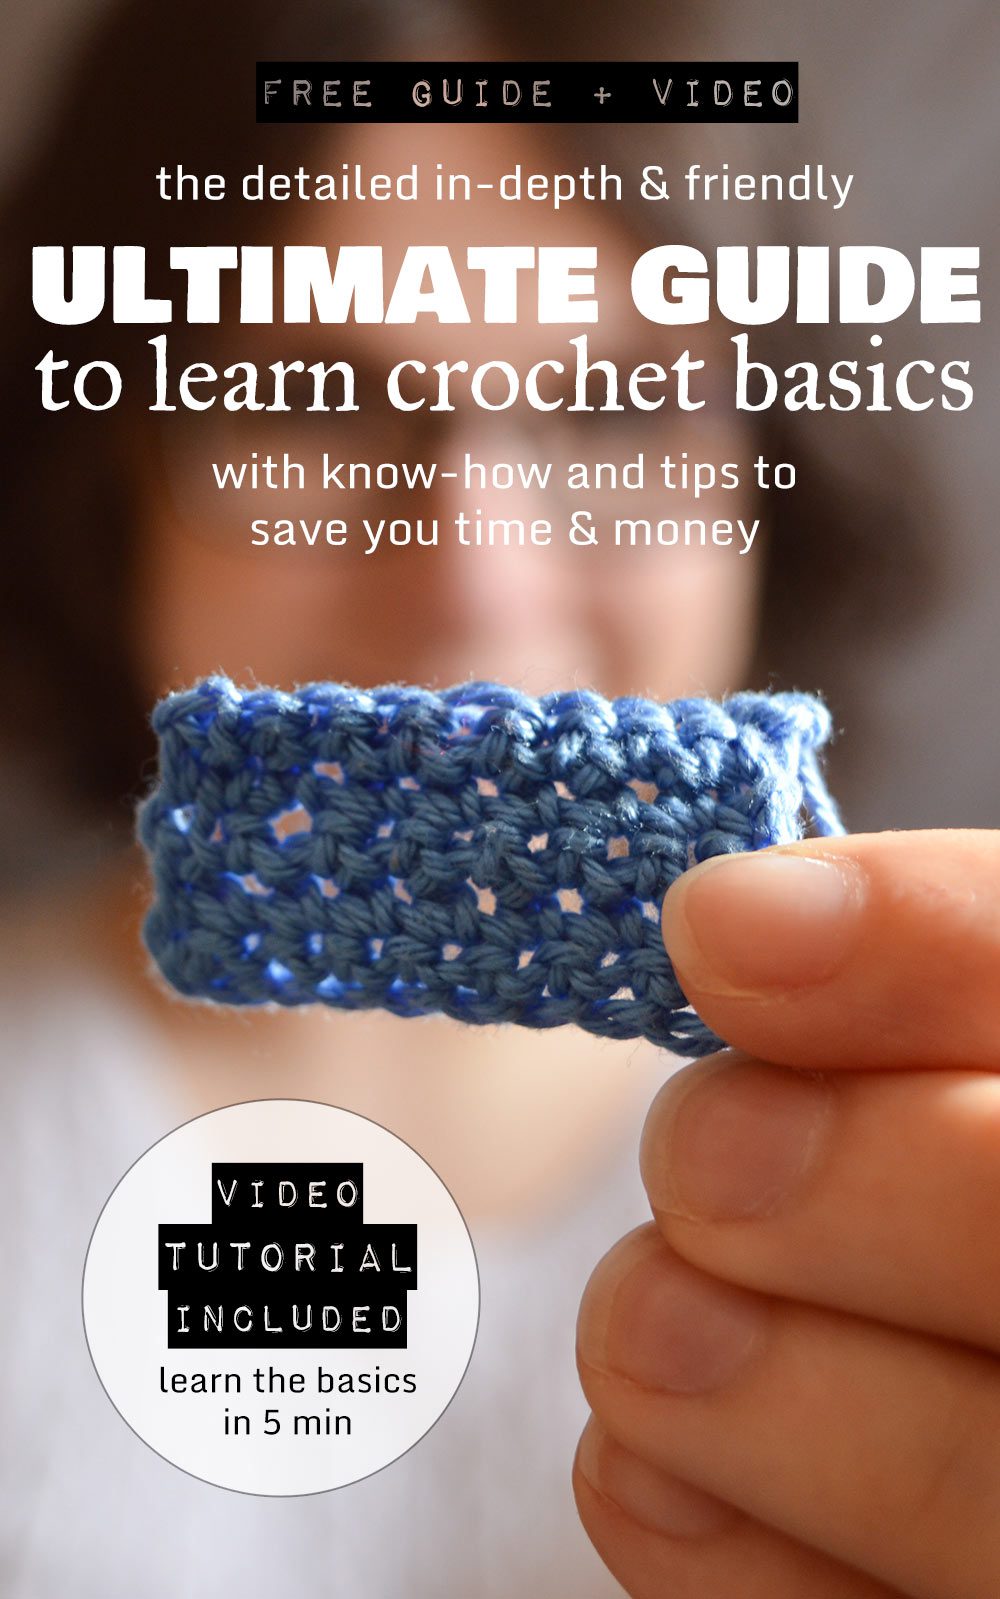 A Comprehensive Guide to Holding Yarn While Crocheting: What's Best?